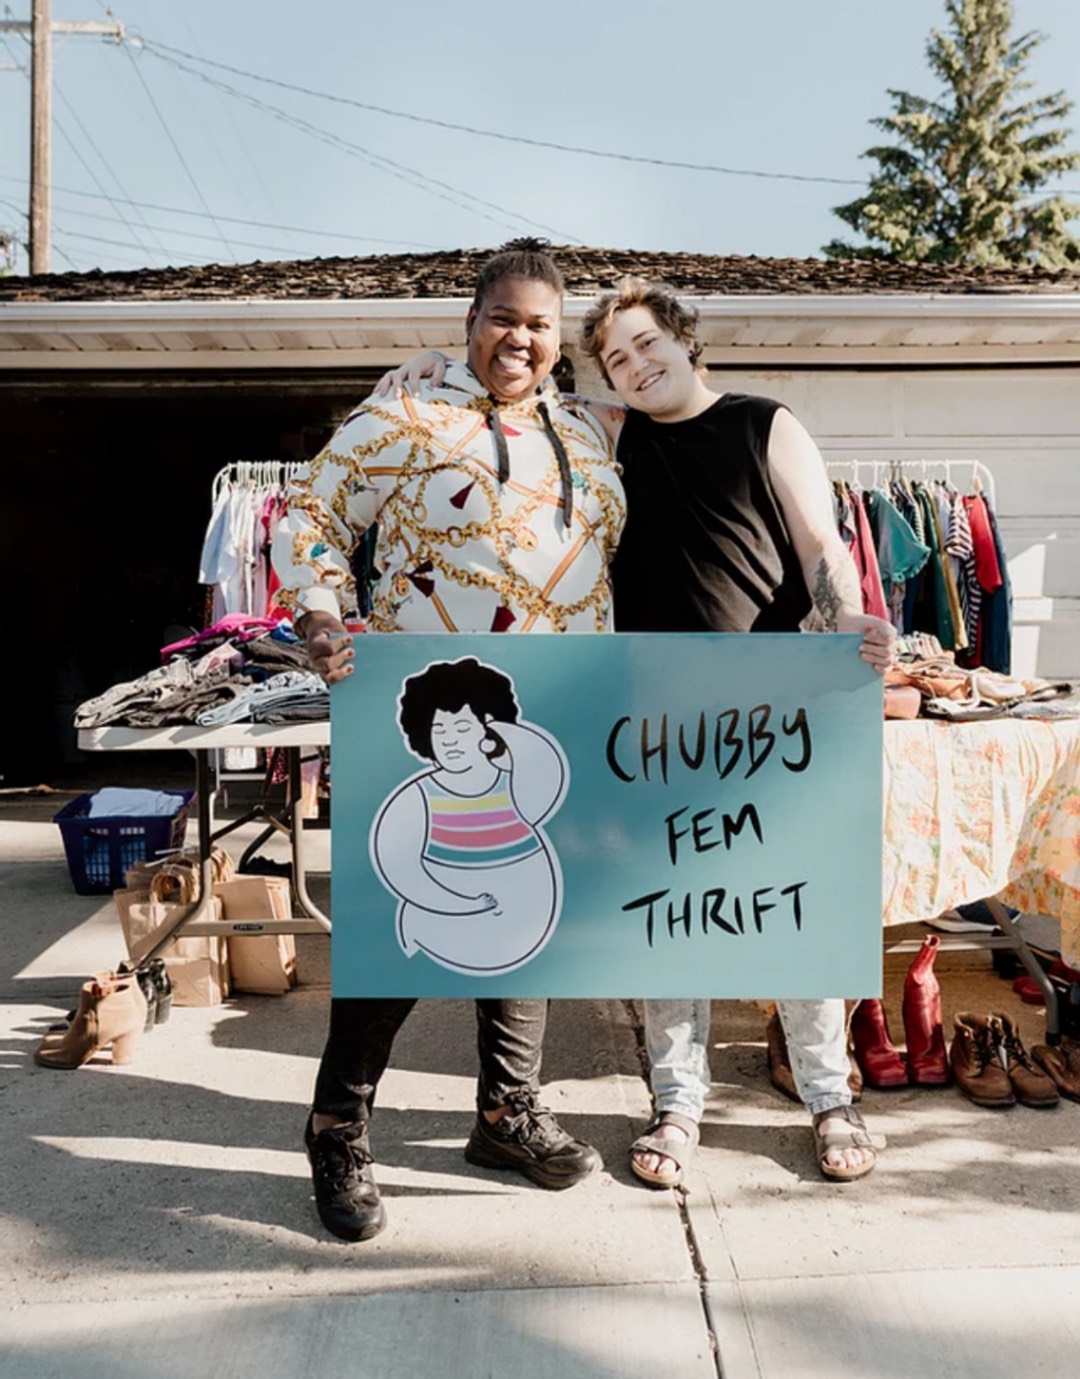 The owners of Chubby Fem Thrift holding a sign with their logo in front of their merchandise.